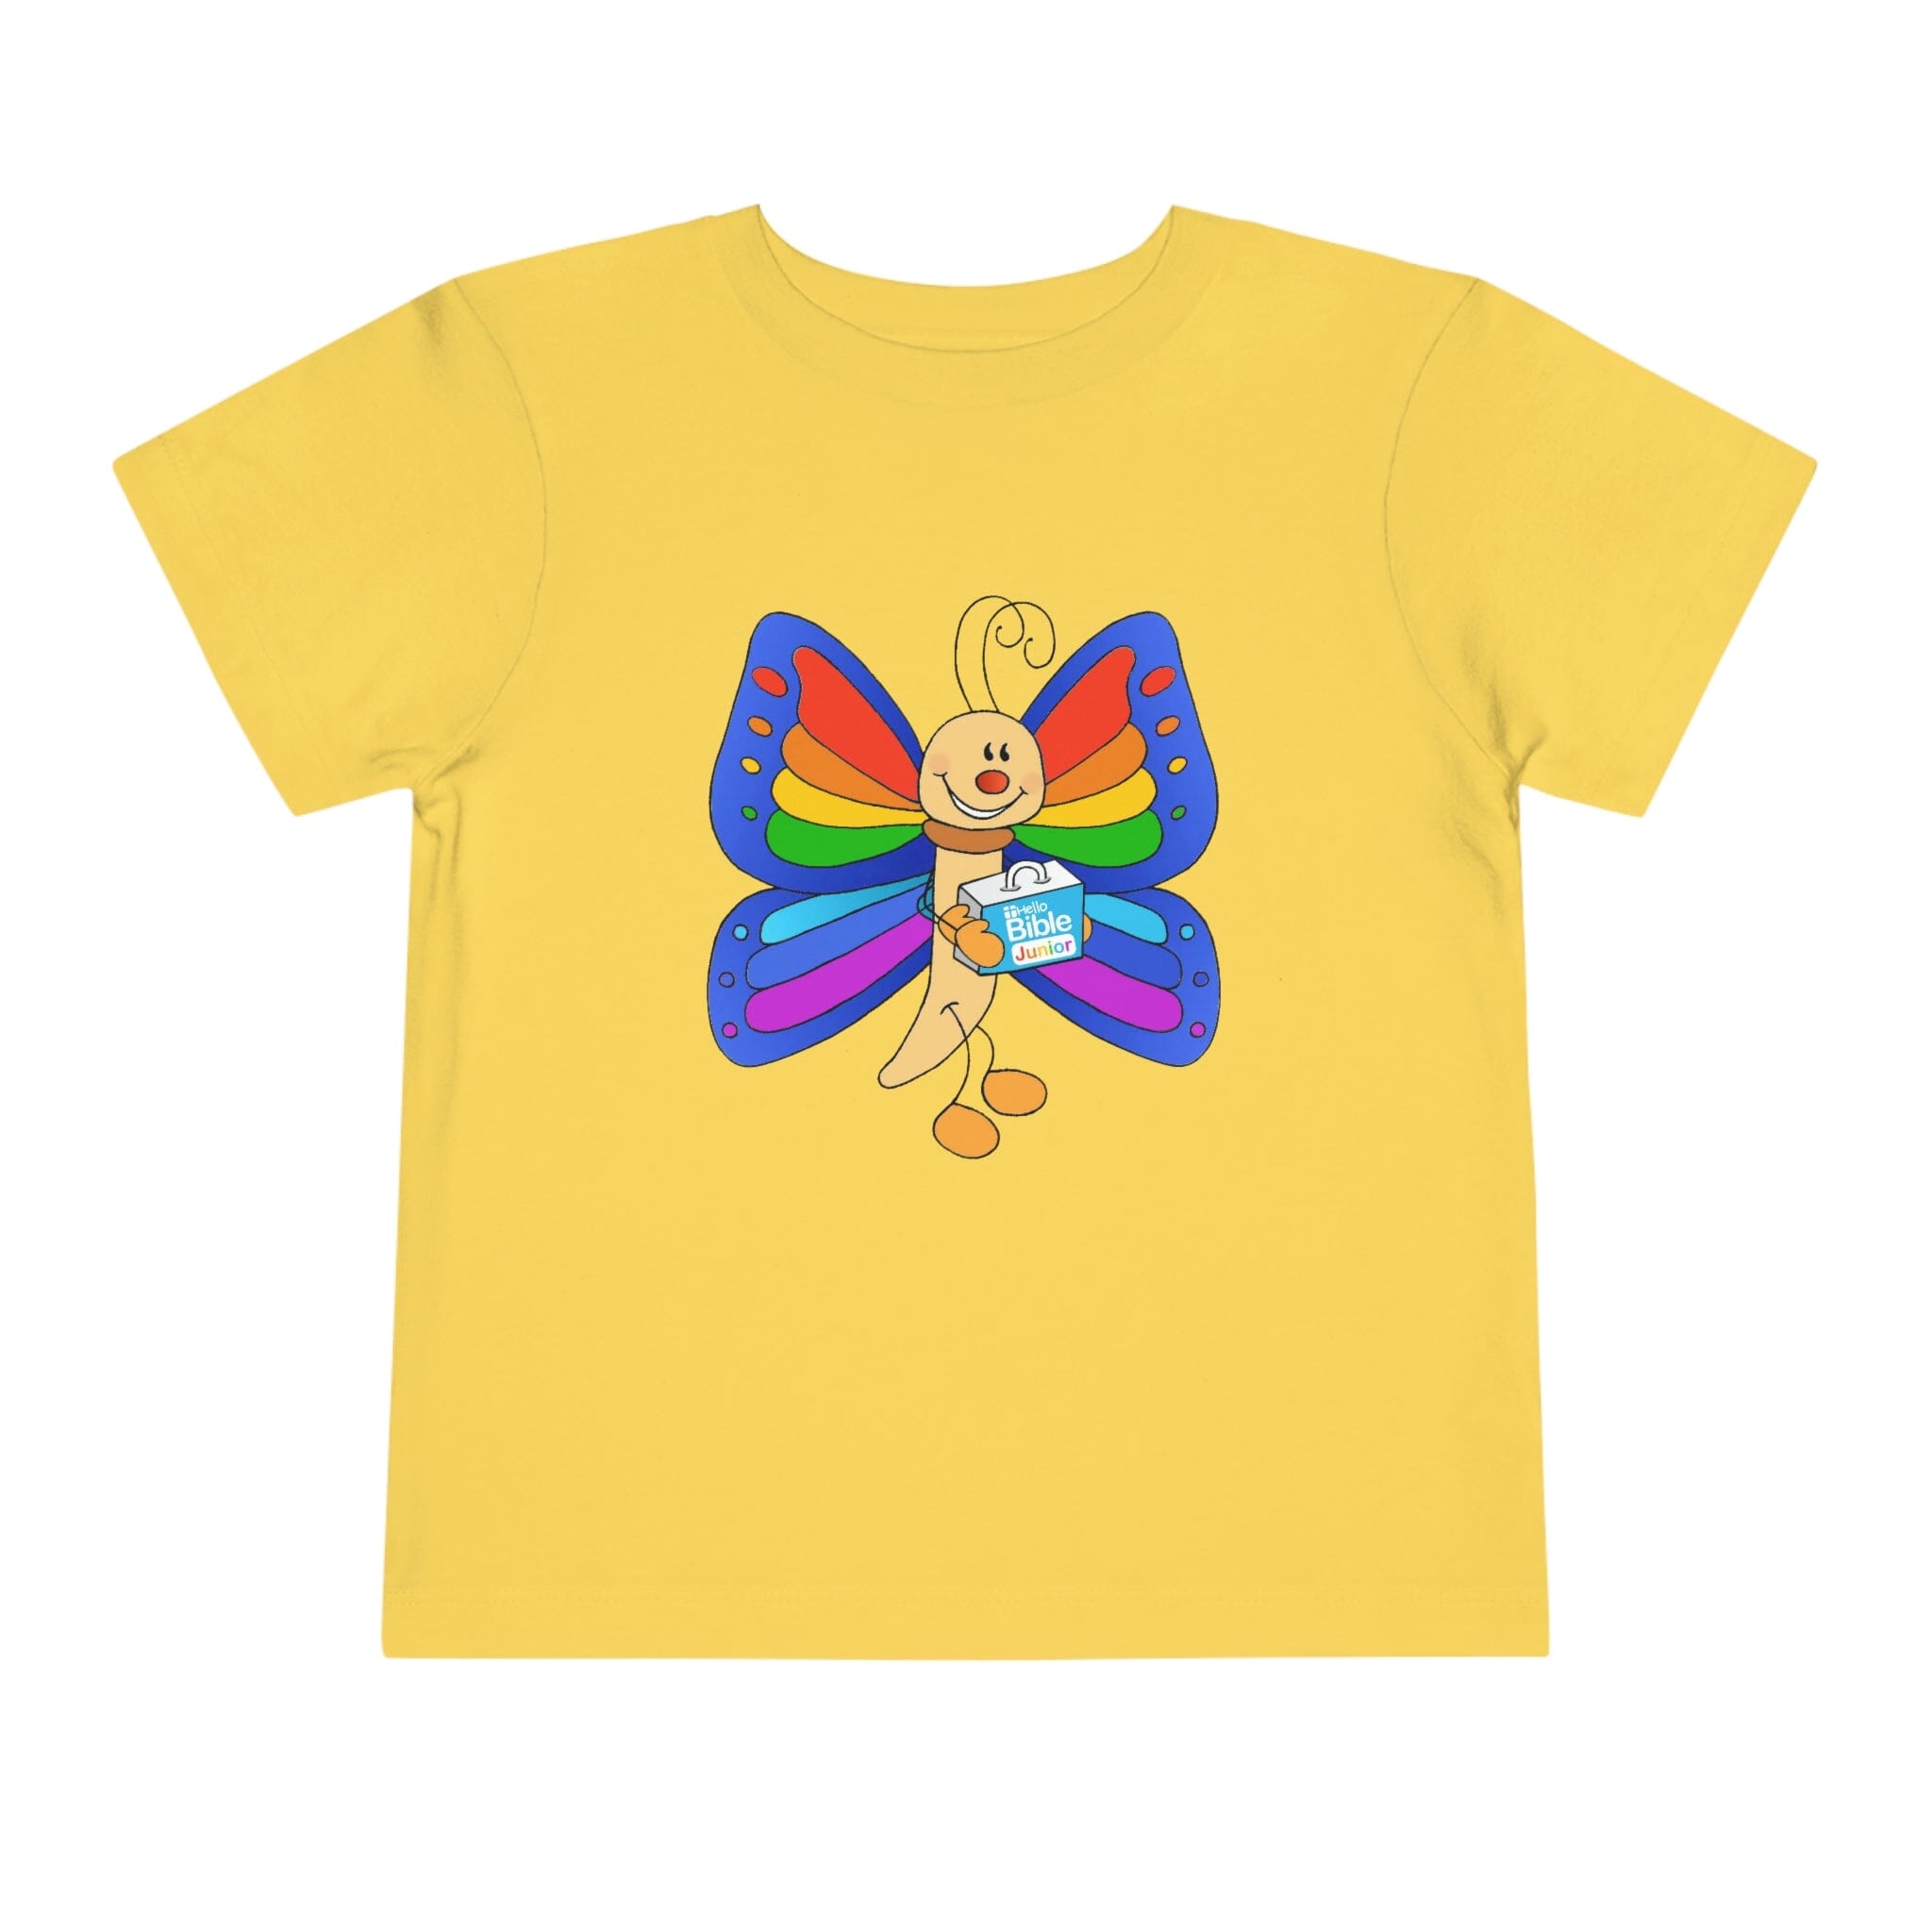 "Bella the Butterfly" HelloBible Toddler Short Sleeve Tee